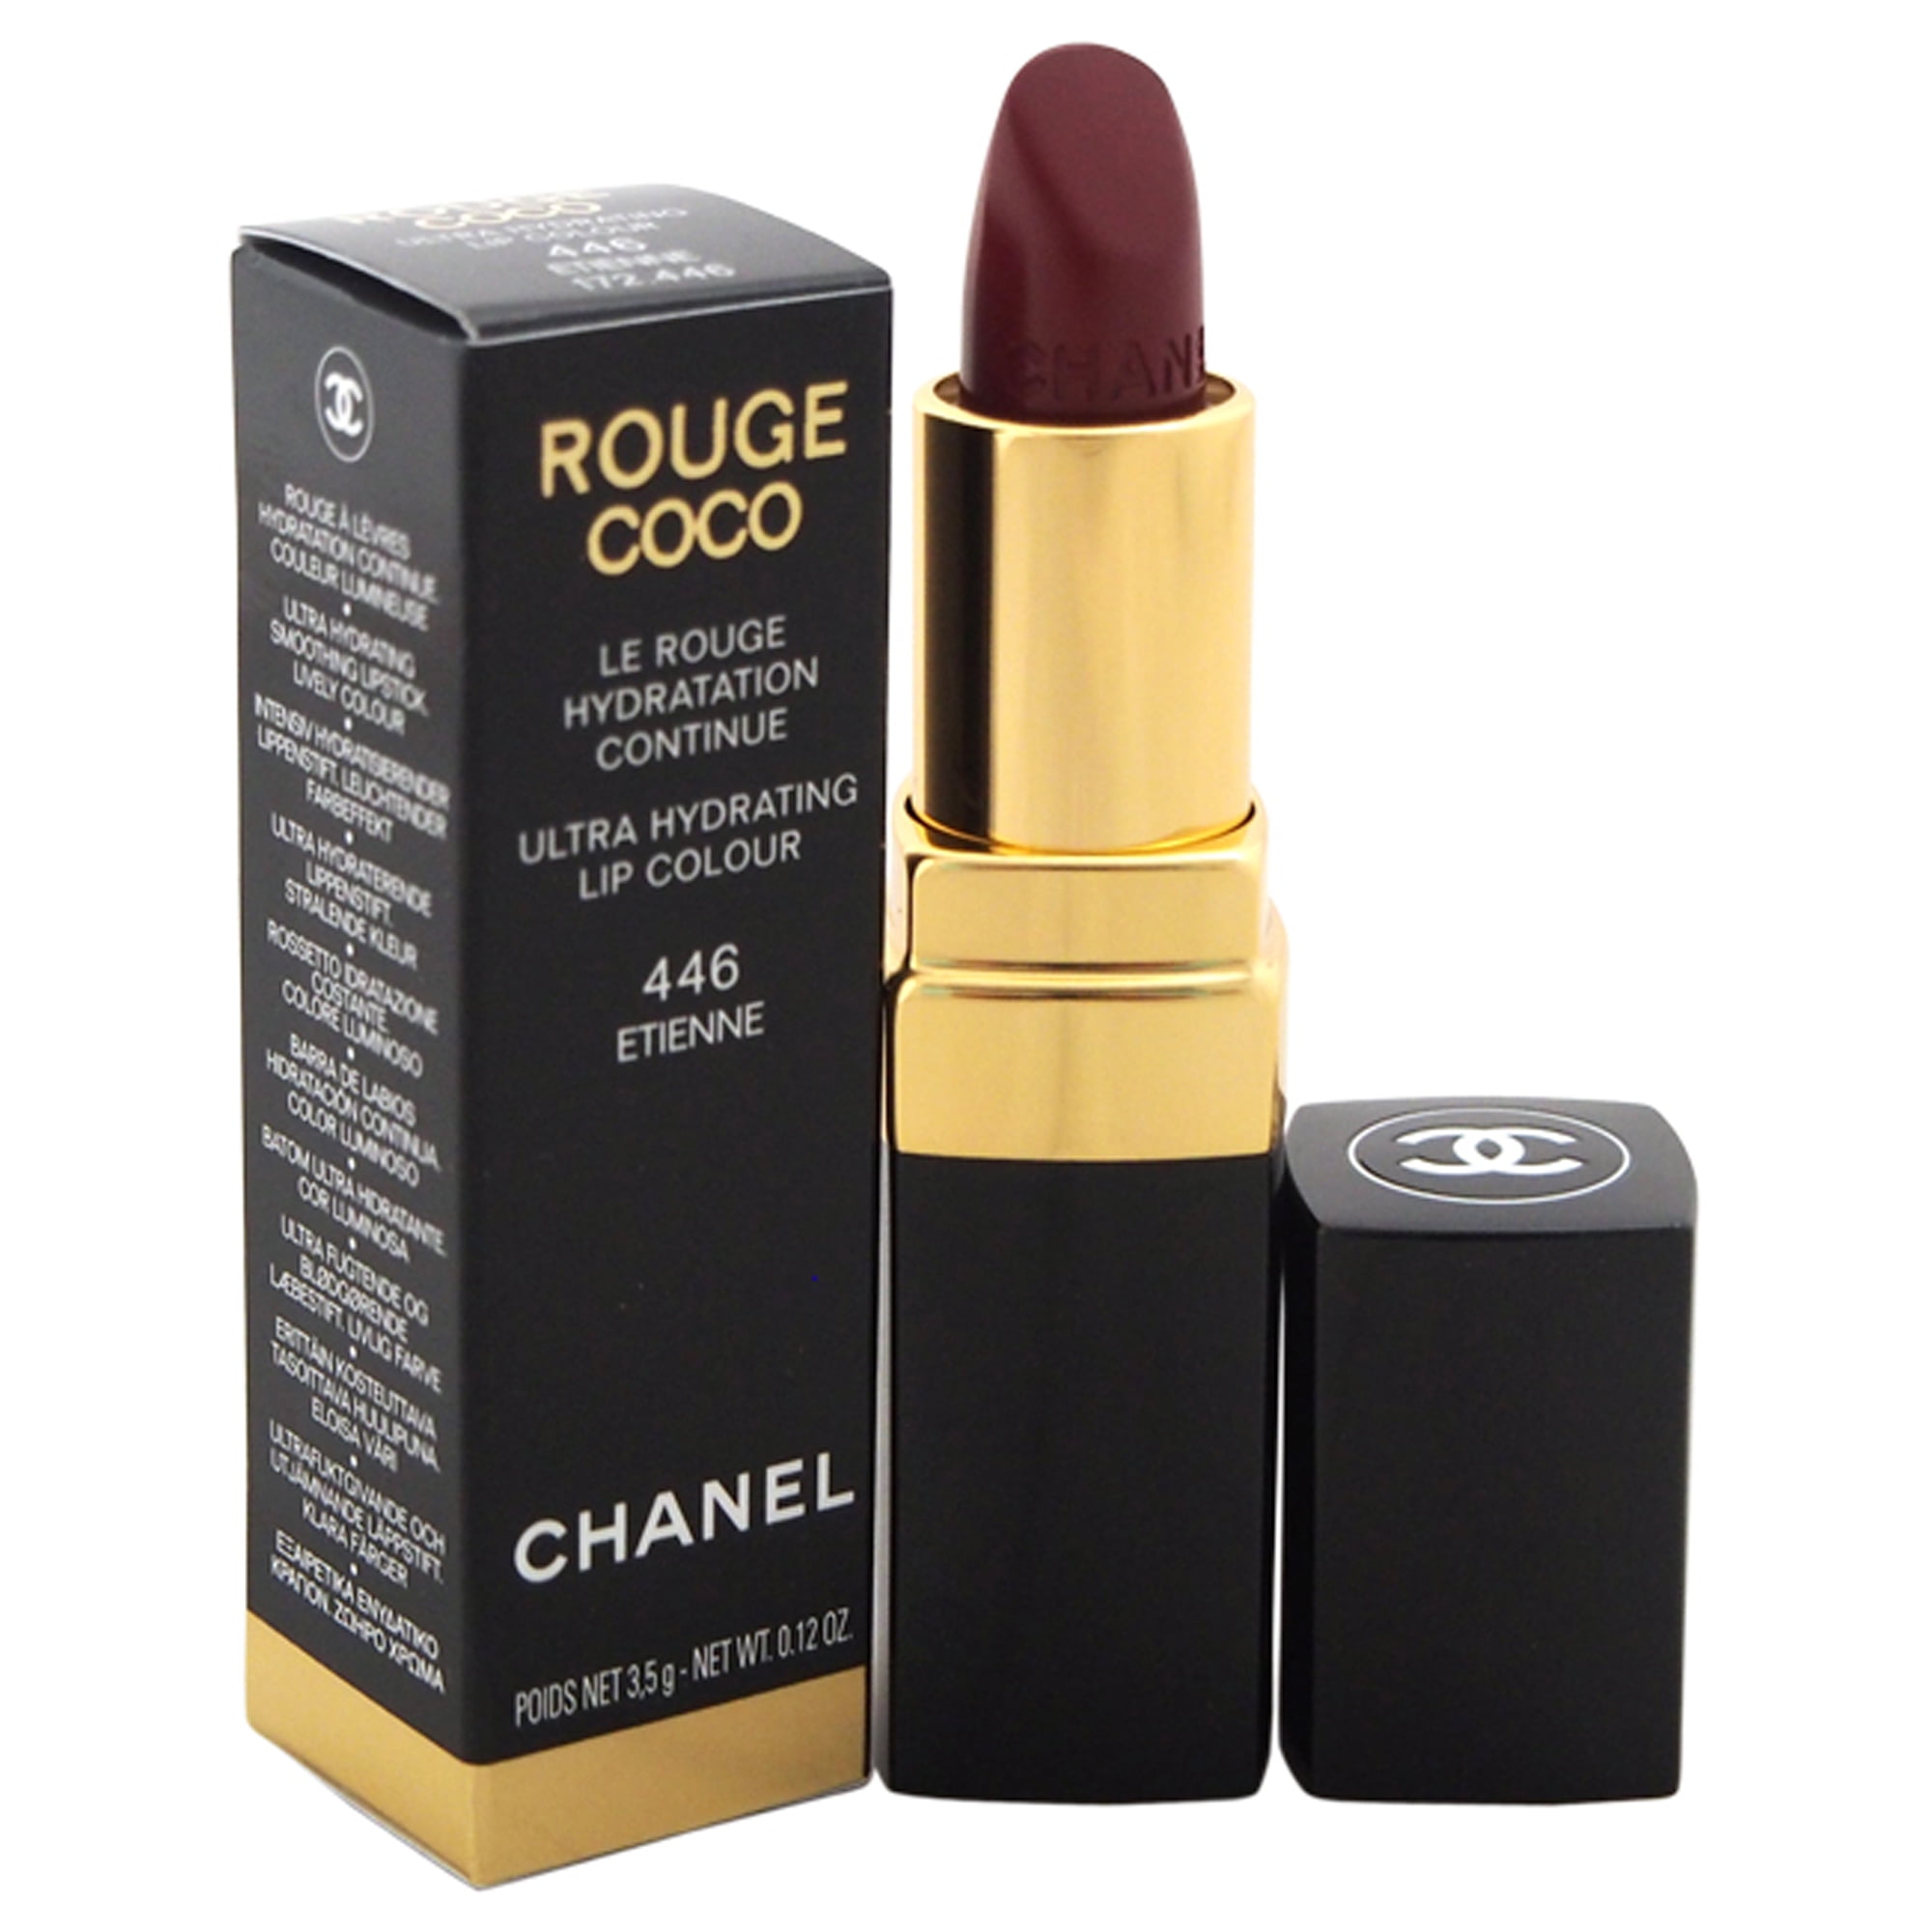 Rouge Coco Shine Hydrating Sheer Lipshine - # 452 Emilienne by Chanel for  Women - 0.11 oz Lipstick (Limited Edition)